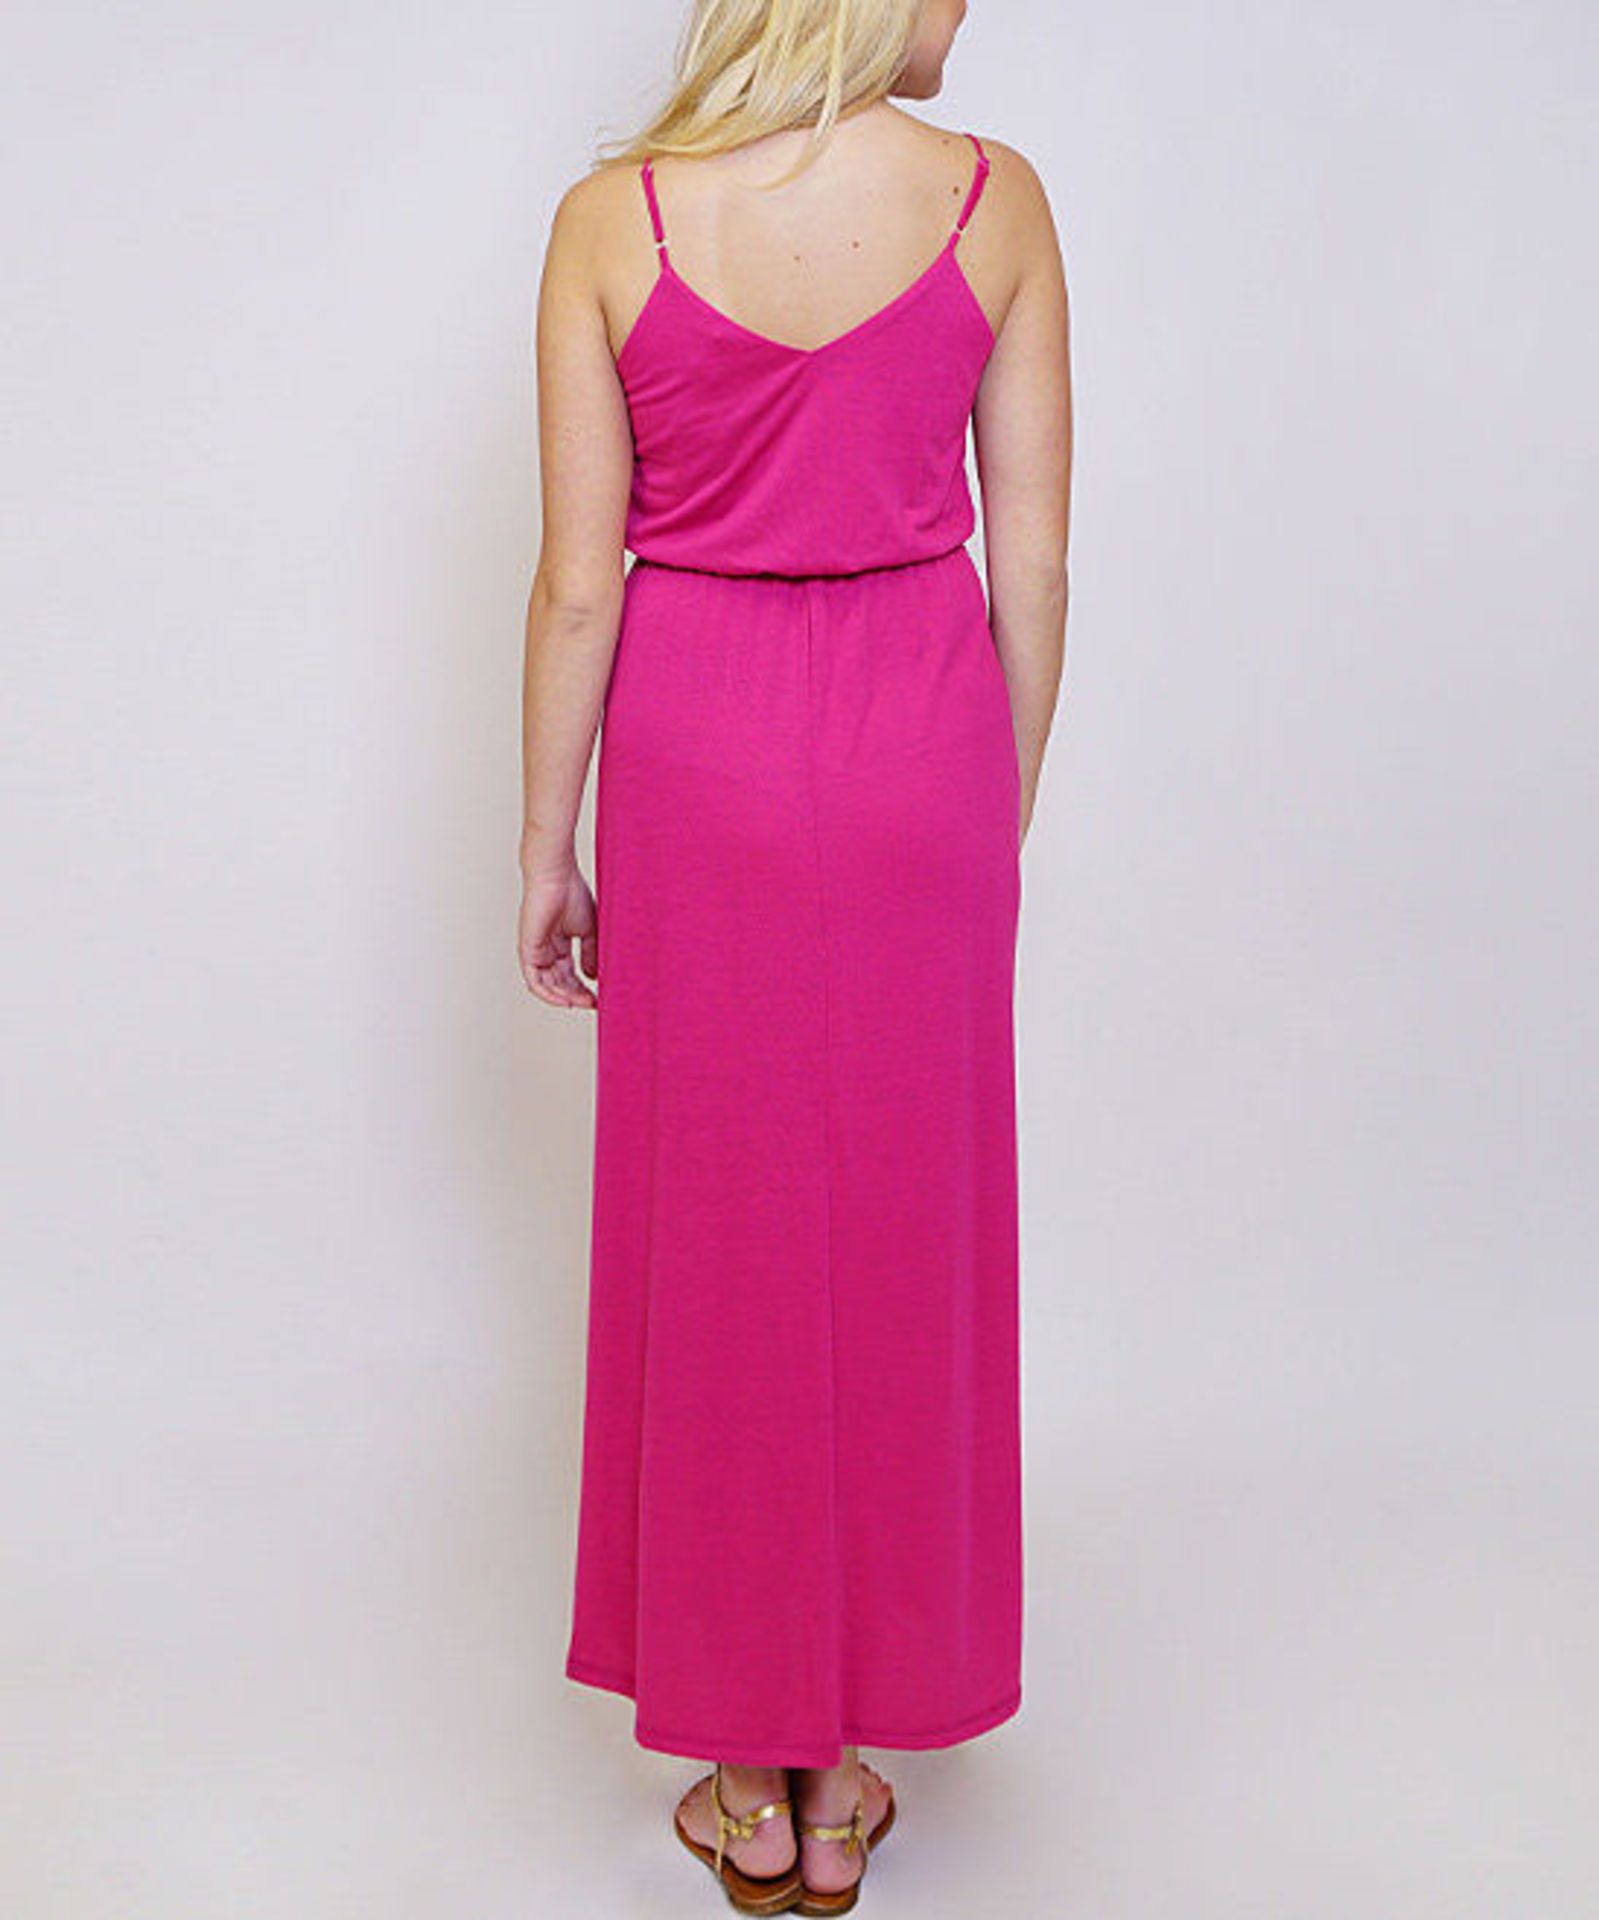 SOB Clothing, Pink Blouson Maxi Dress, US Size Large/UK Size 16 (New with tags) [Ref: 46315170- T-